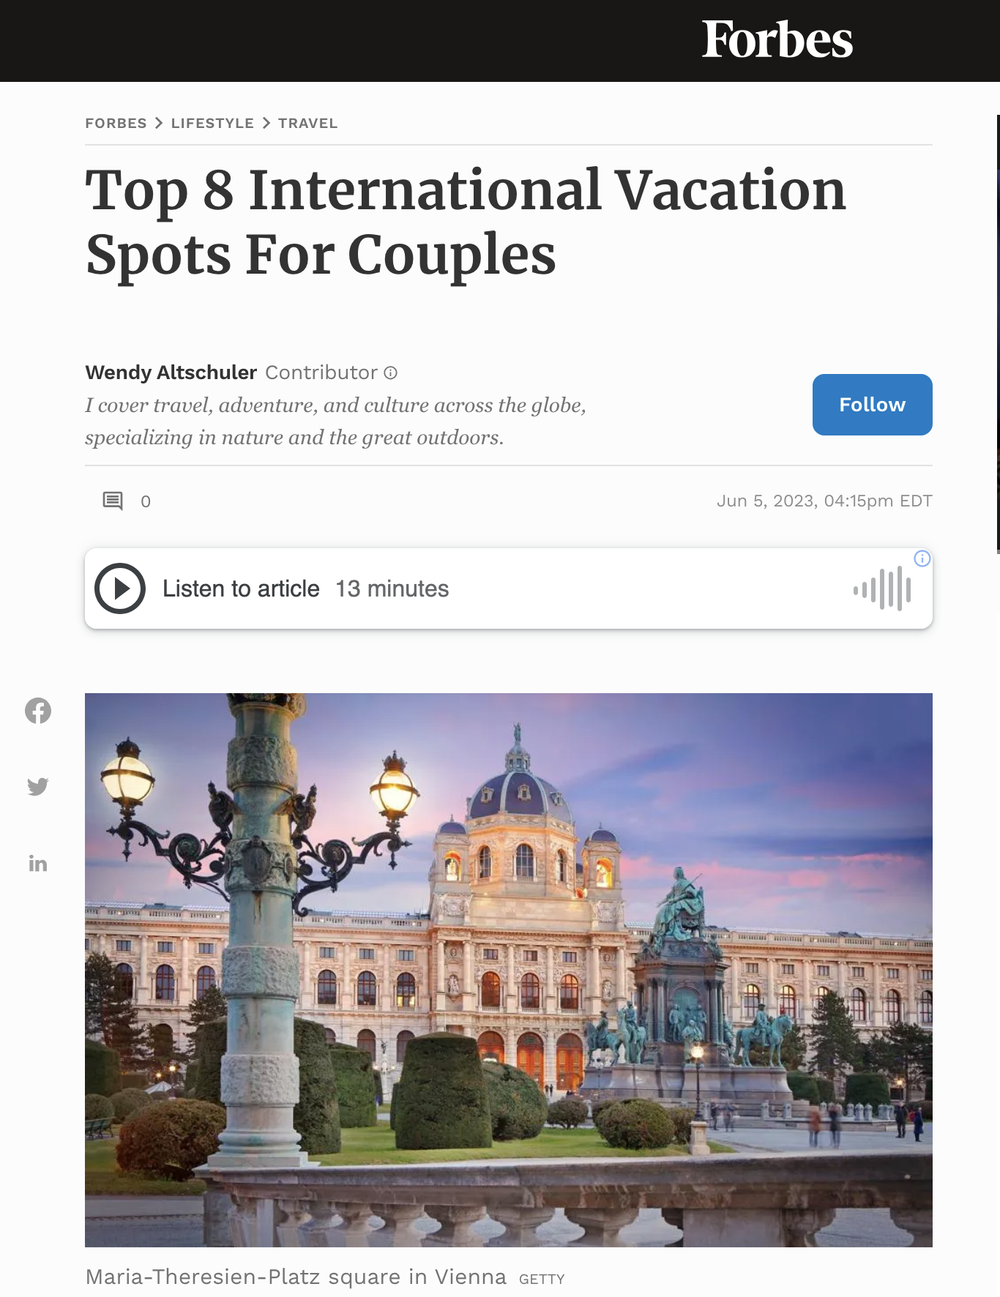 Top 8 International Vacation Spots For Couples